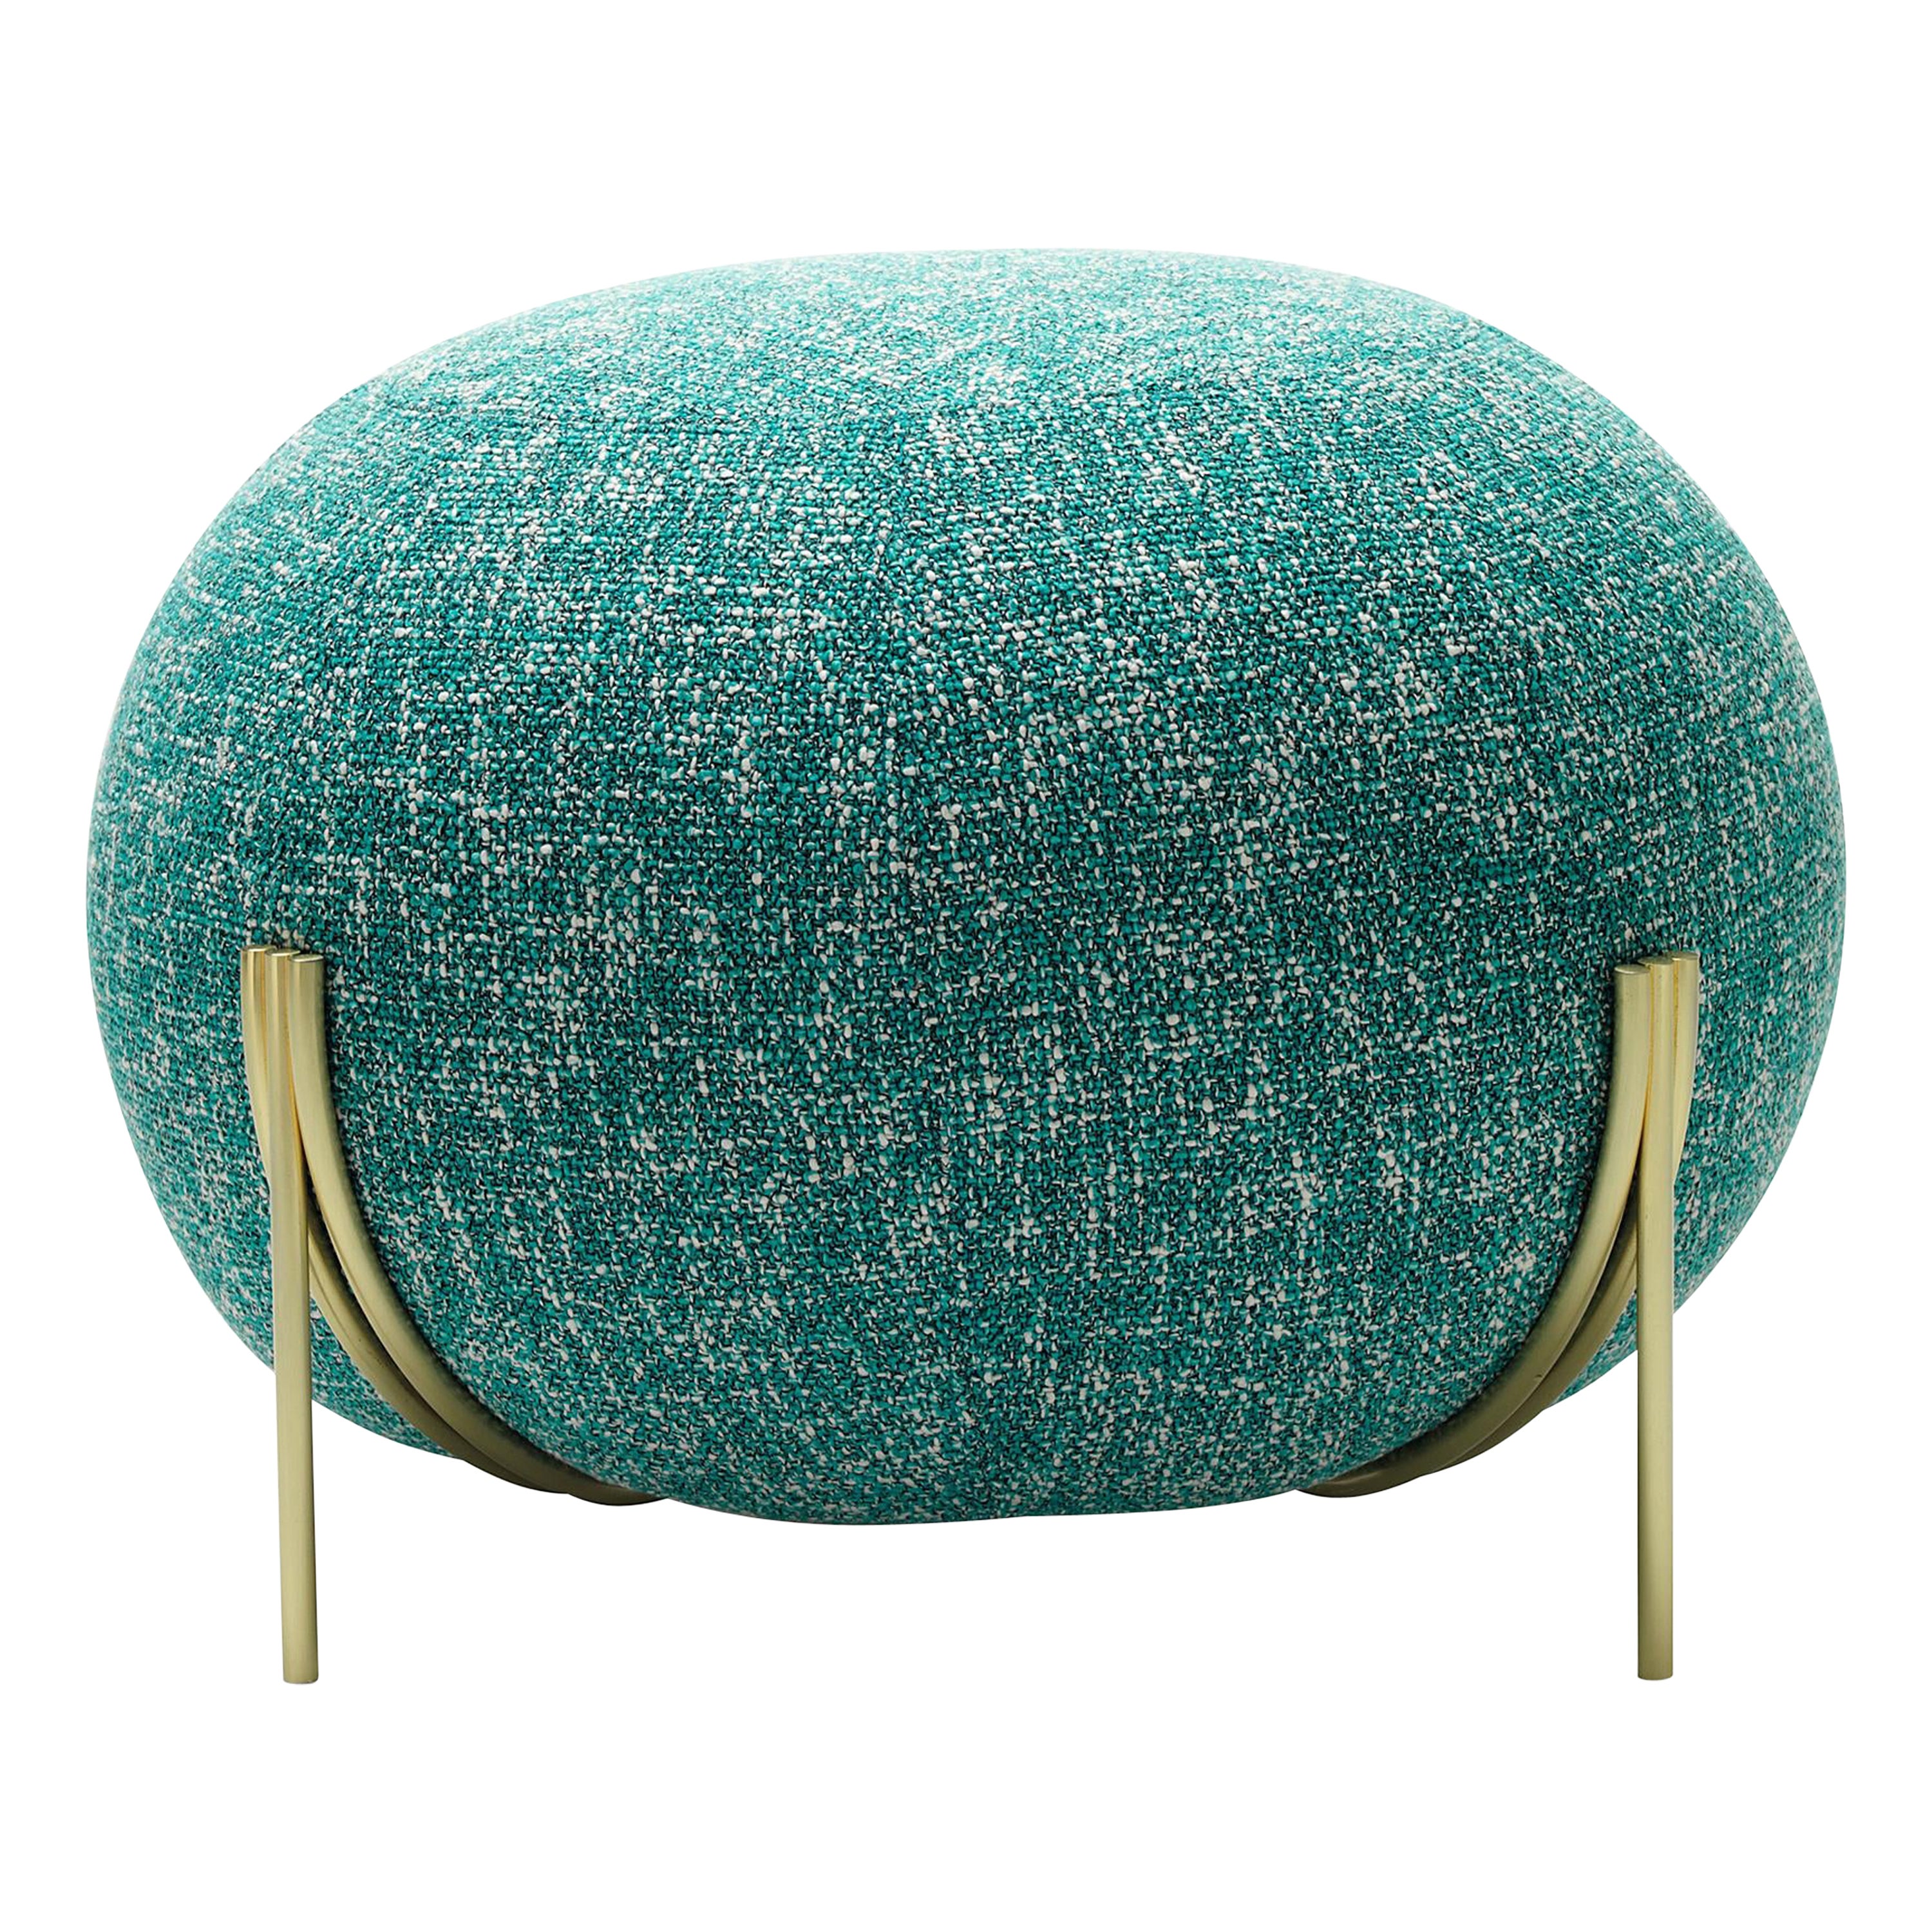 Geo Small Pouf in Seventy Blue Upholstery & Satin Brass Legs by Paolo Grasselli